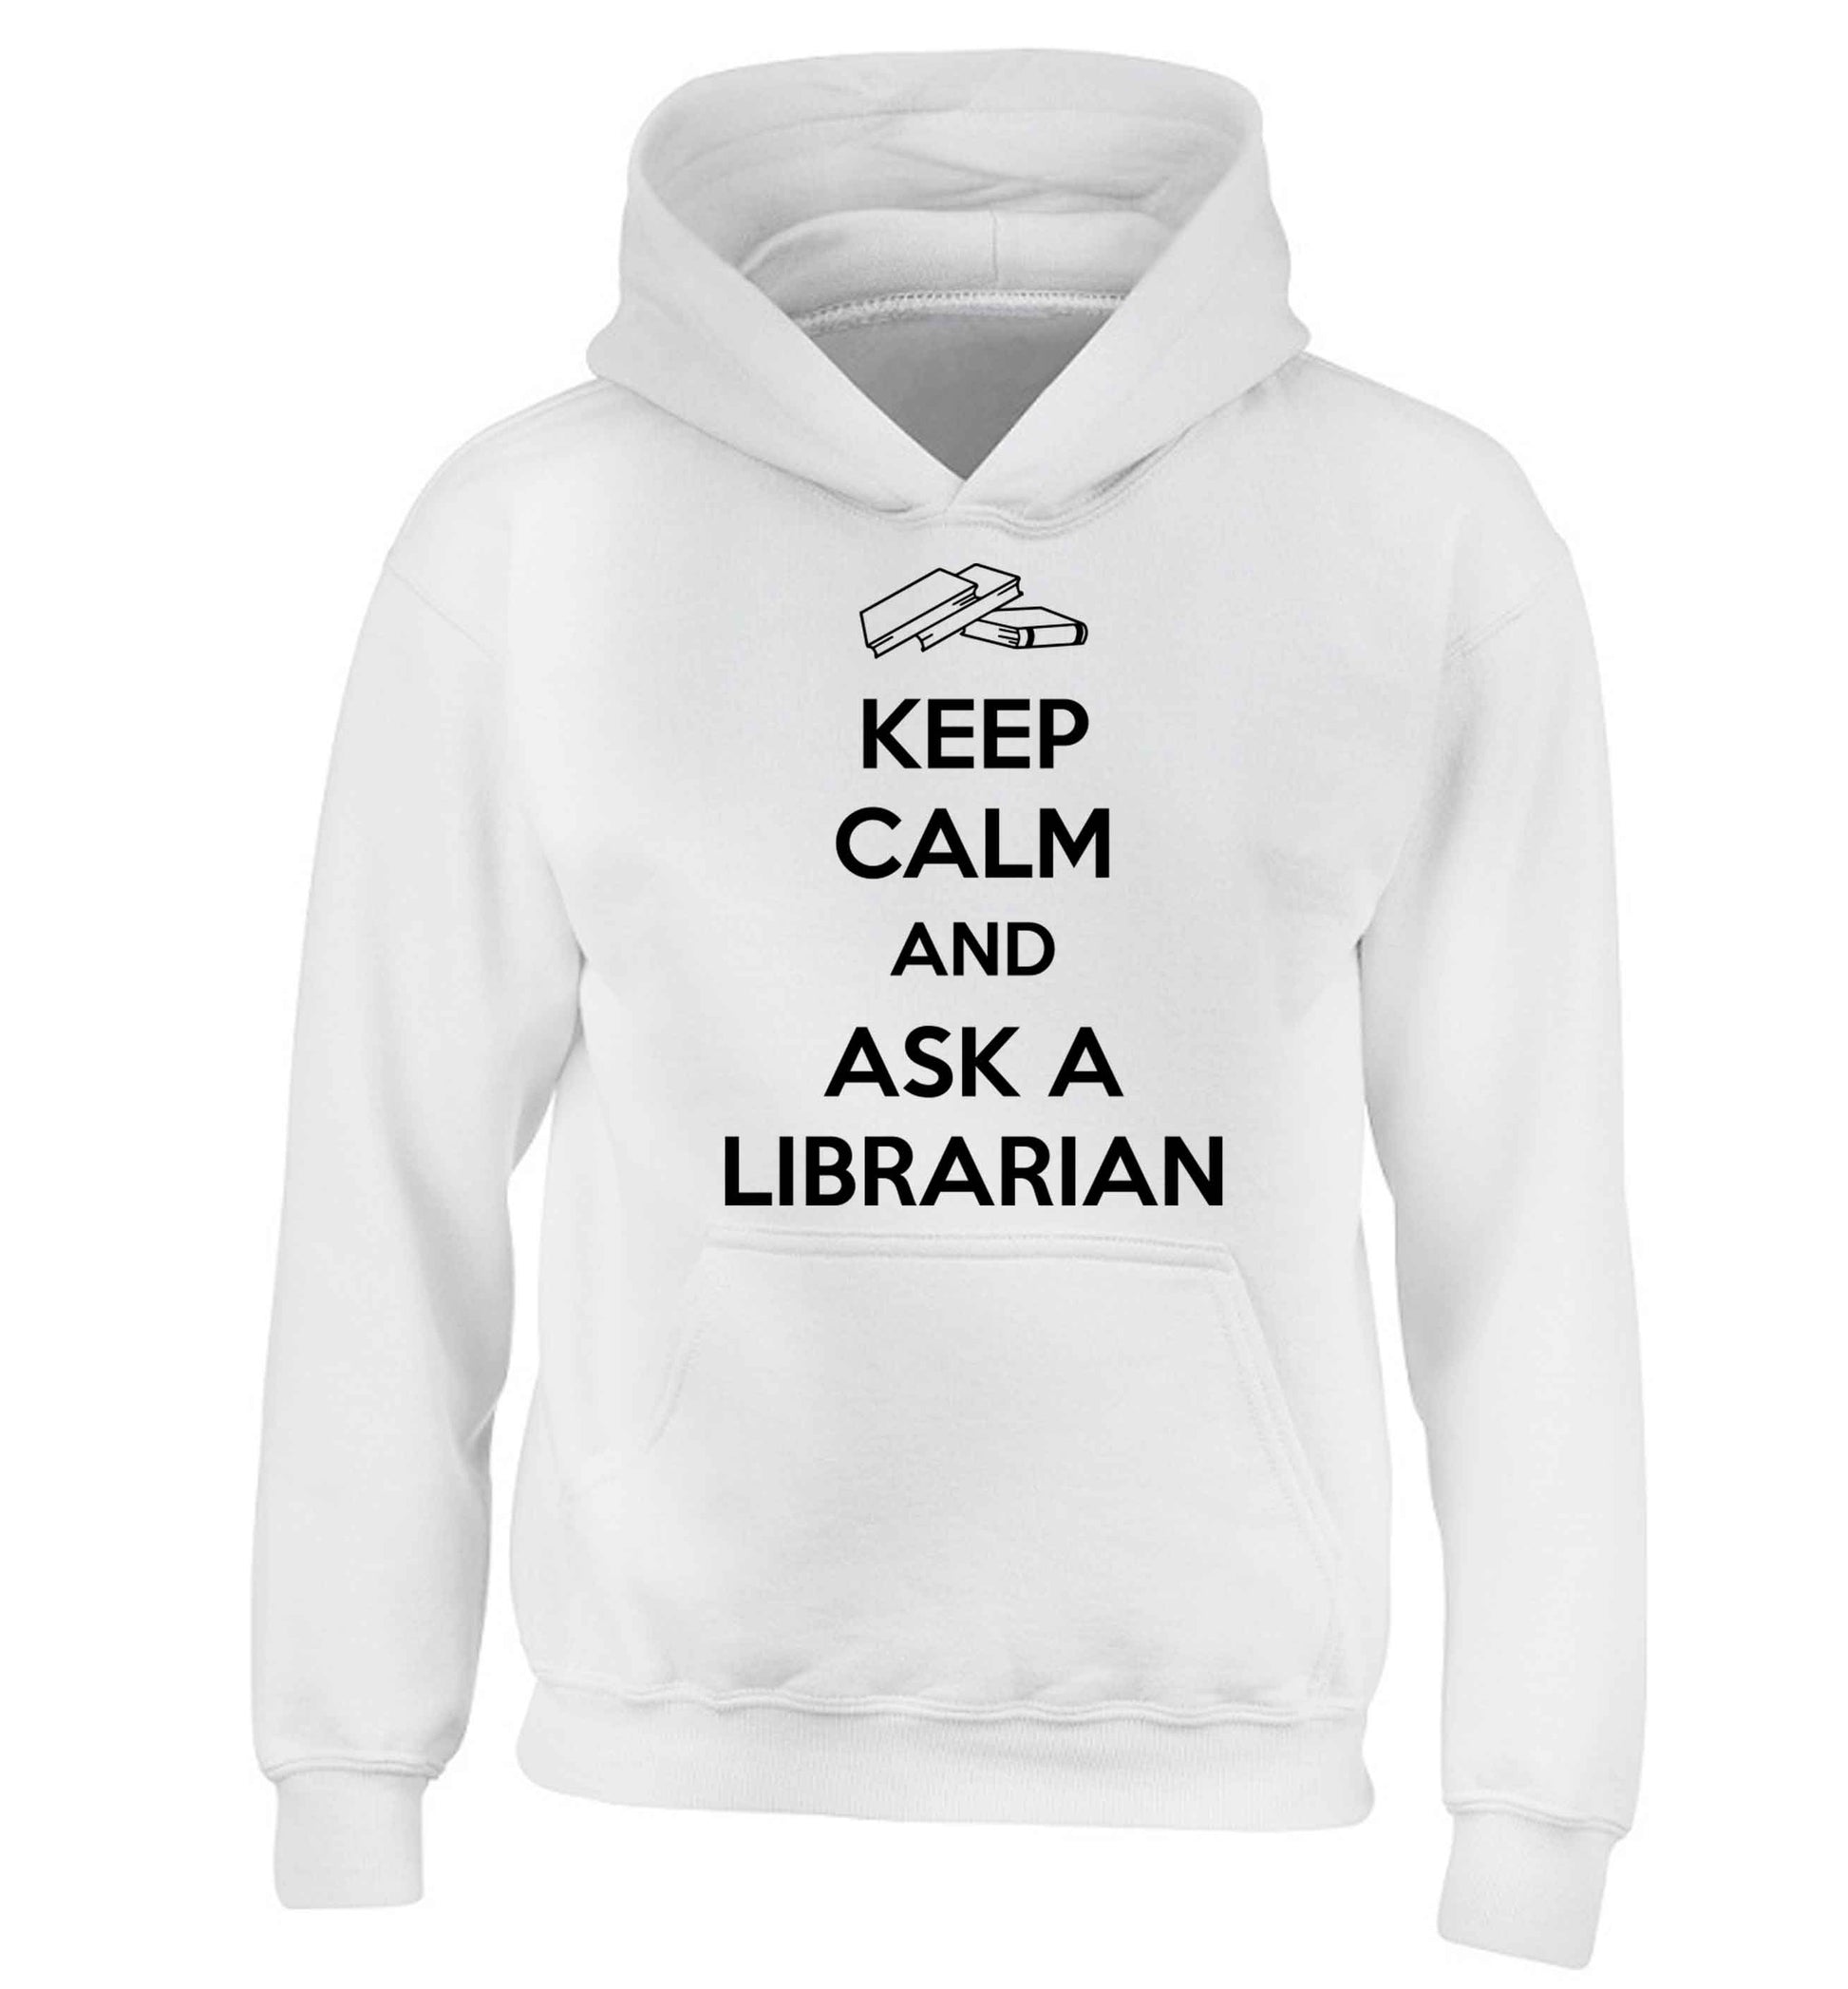 Keep calm and ask a librarian children's white hoodie 12-13 Years